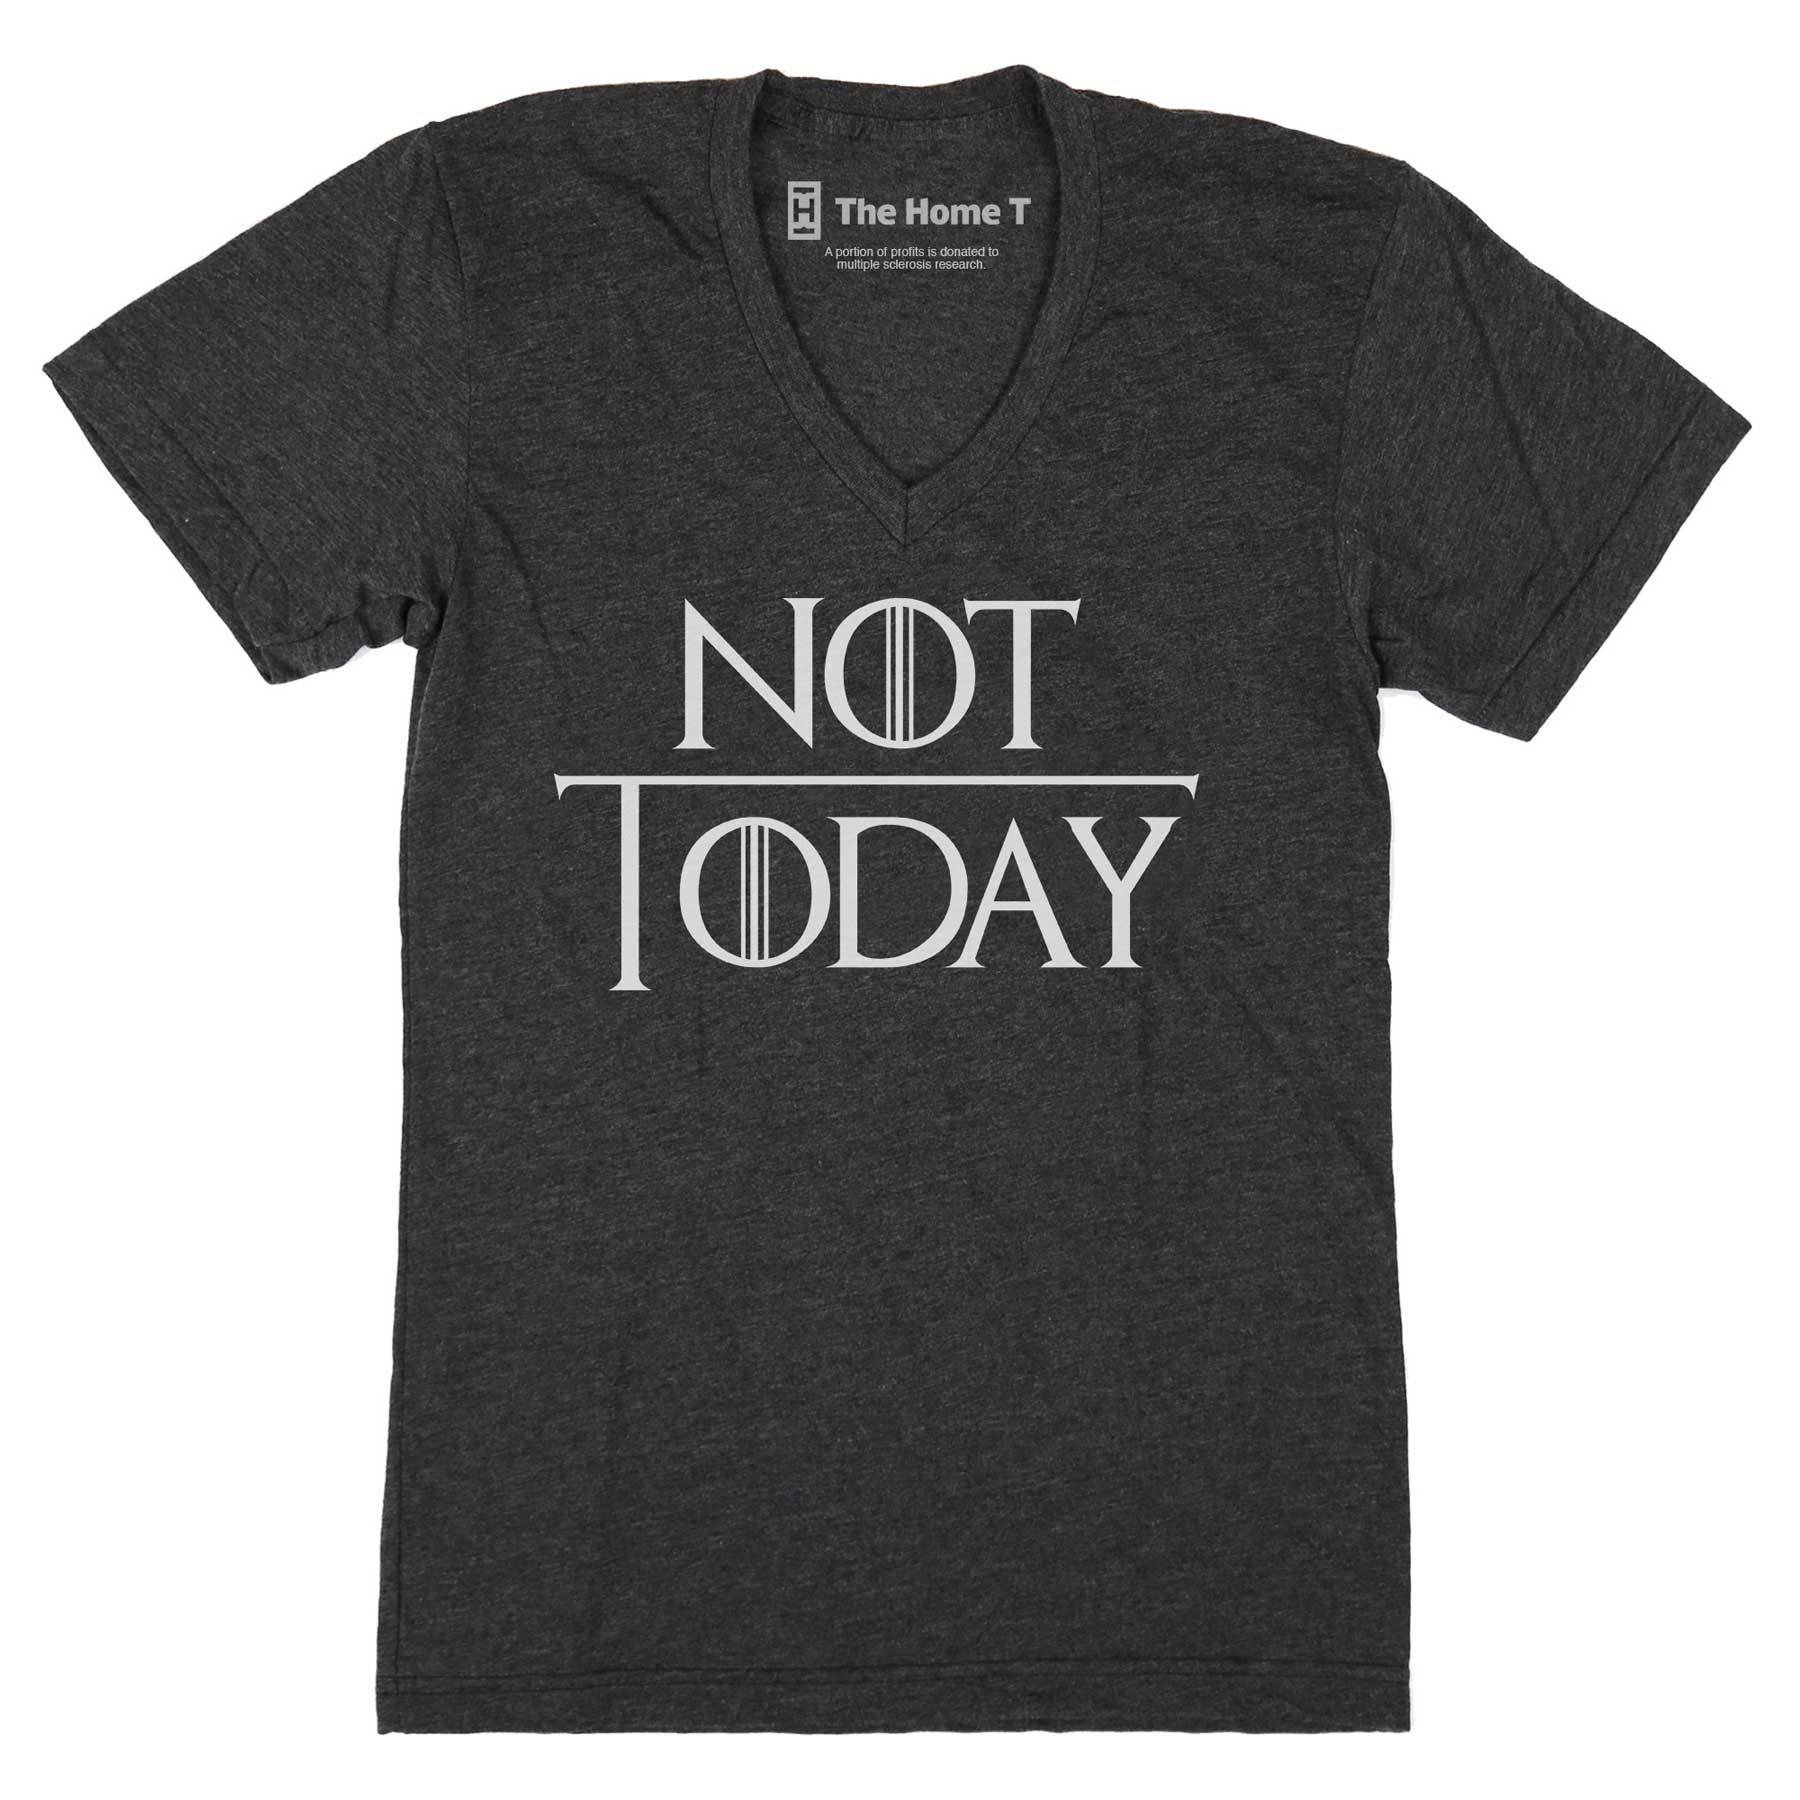 Not Today Crew neck The Home T XS V-Neck